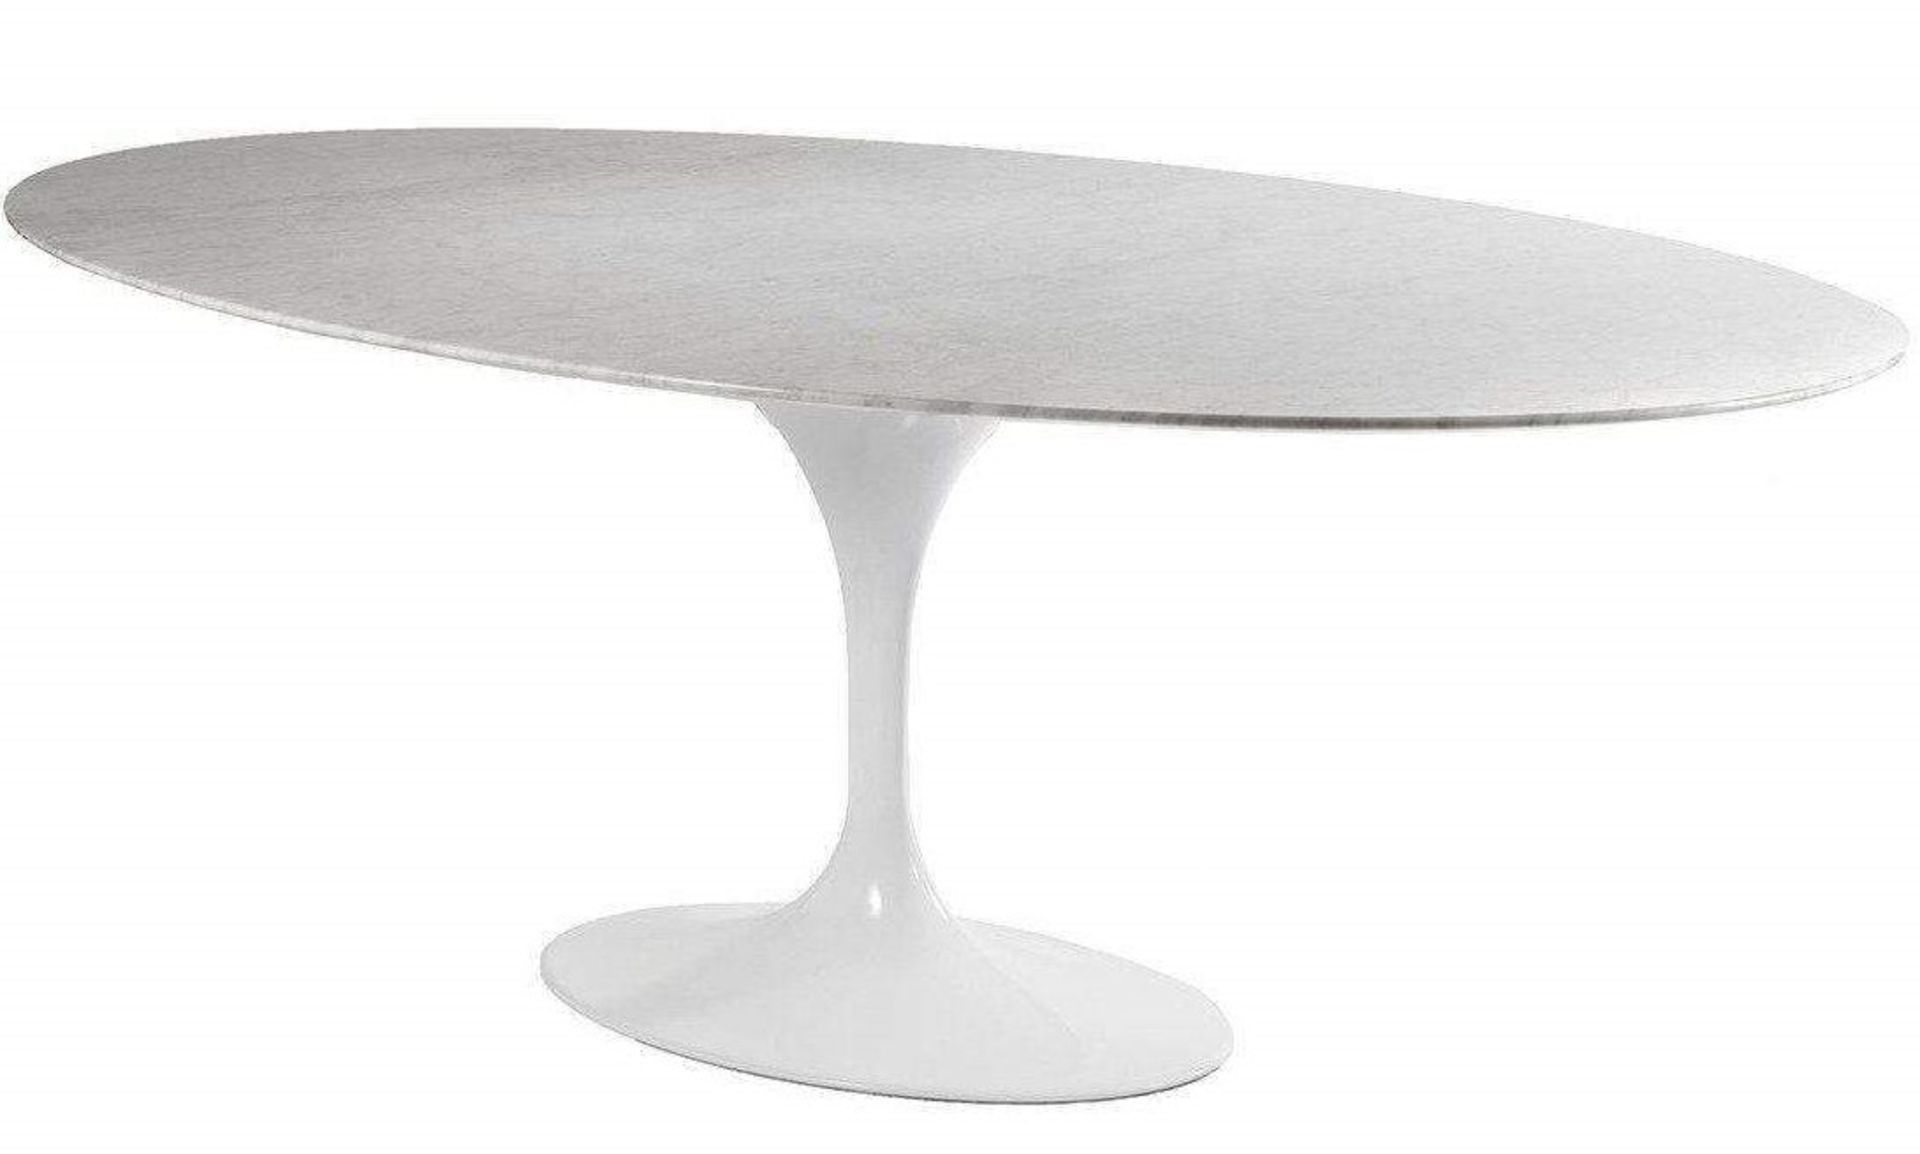 1 x Eero Saarinen Inspired Carrara Marble Tulip Dining Table - 1950's Reproduction Oval Dining Table